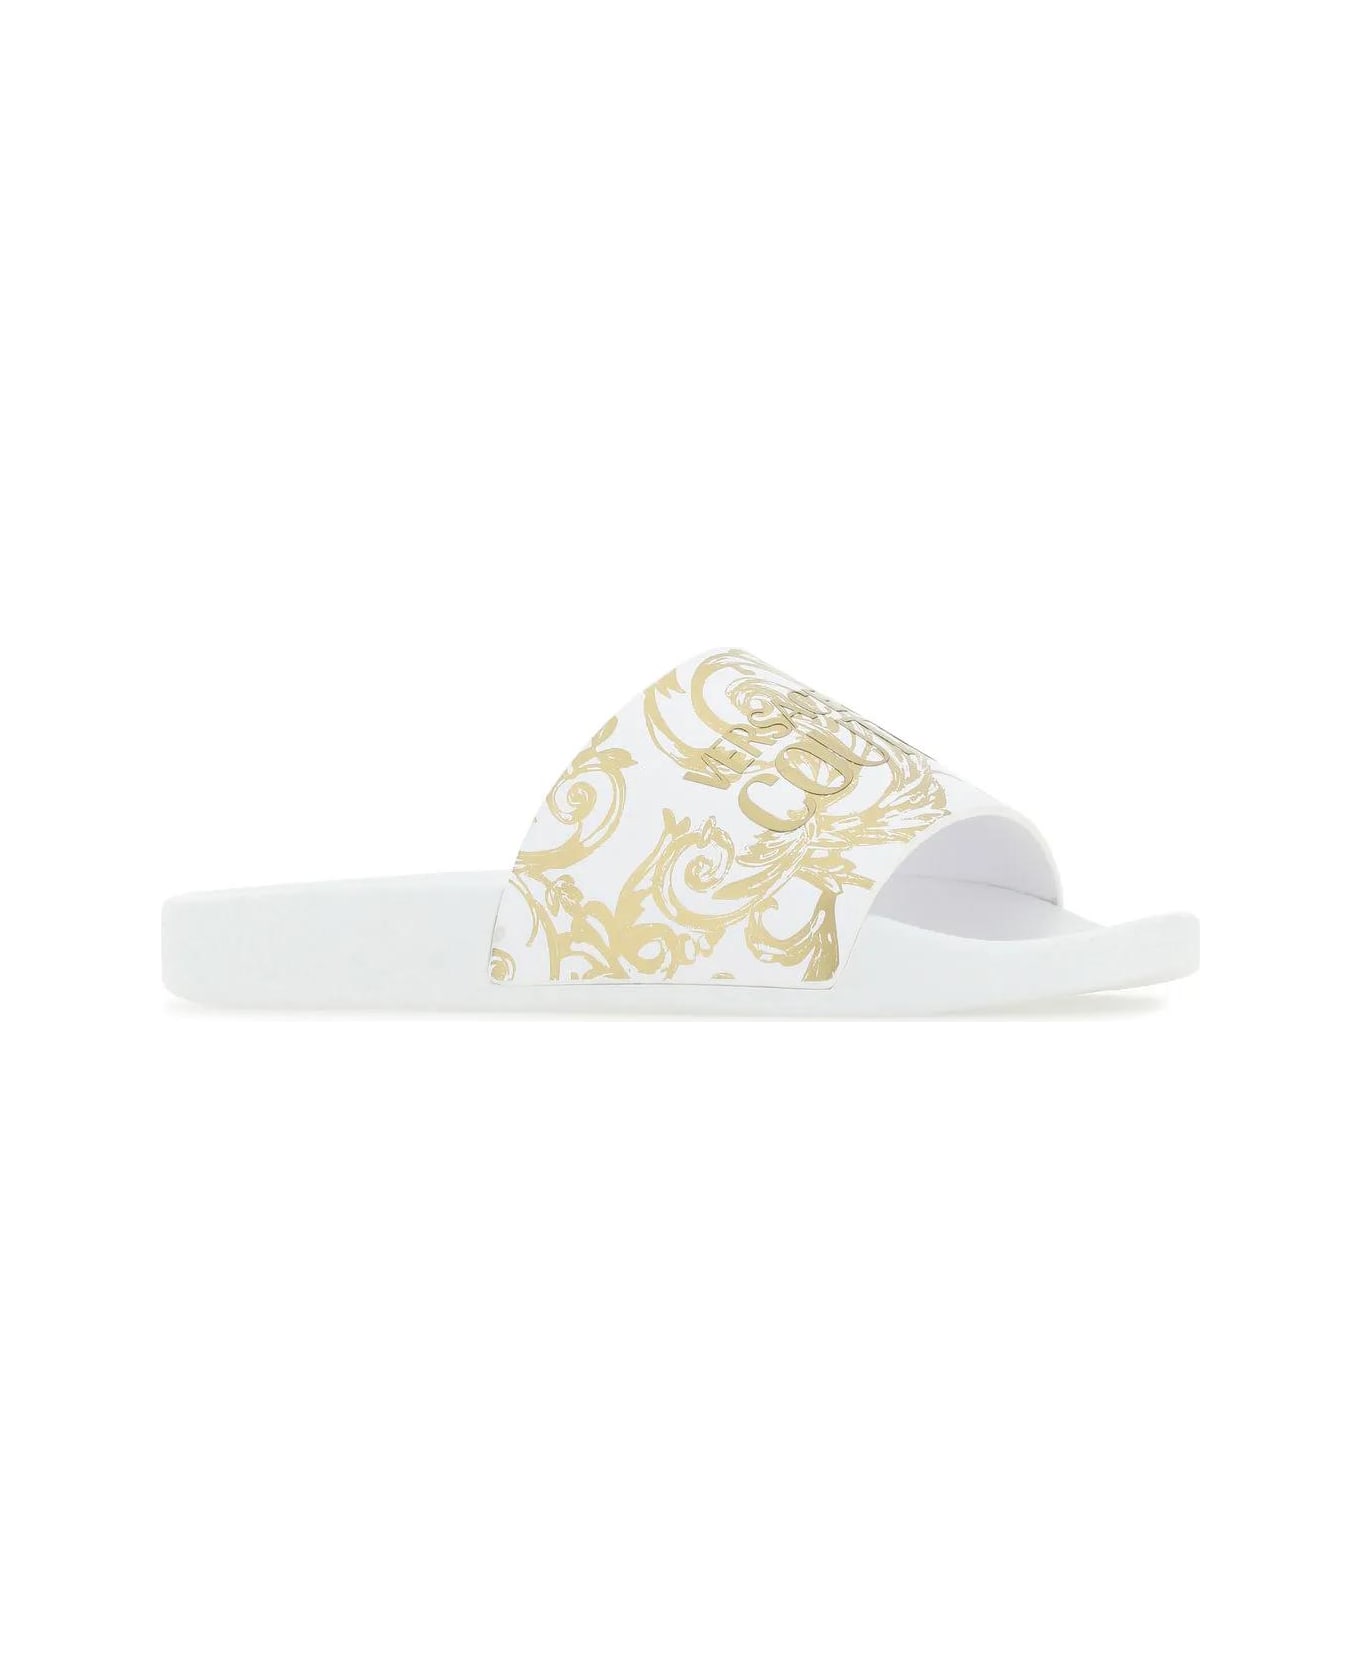 Versace Jeans Couture Printed Rubber Slippers - White/gold